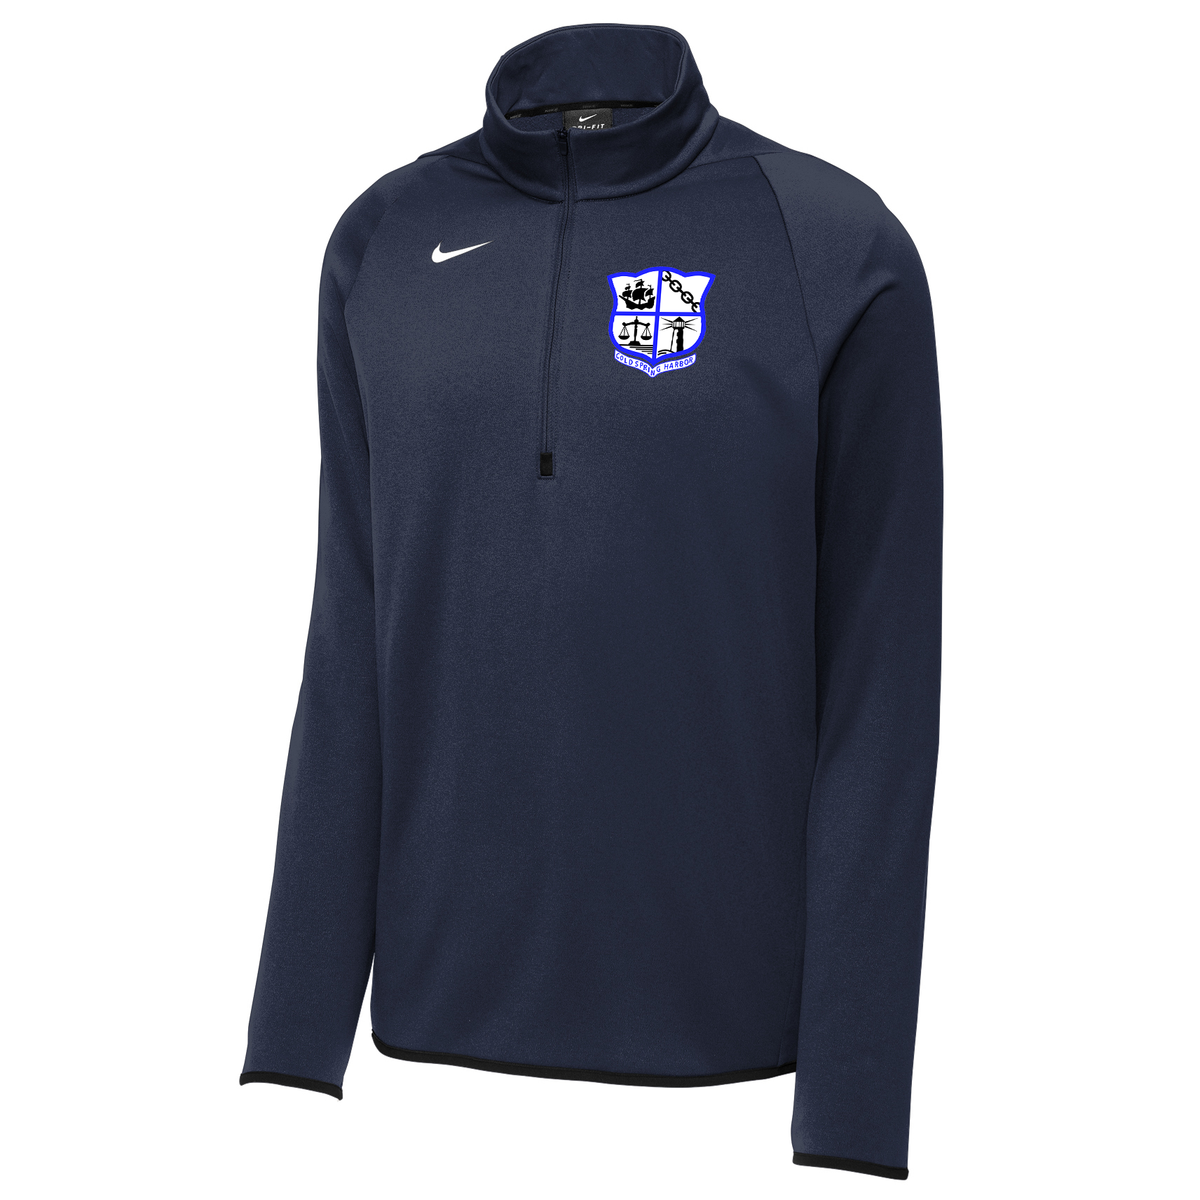 Cold Spring Harbor PAL Limited Edition Nike 1/4 Zip